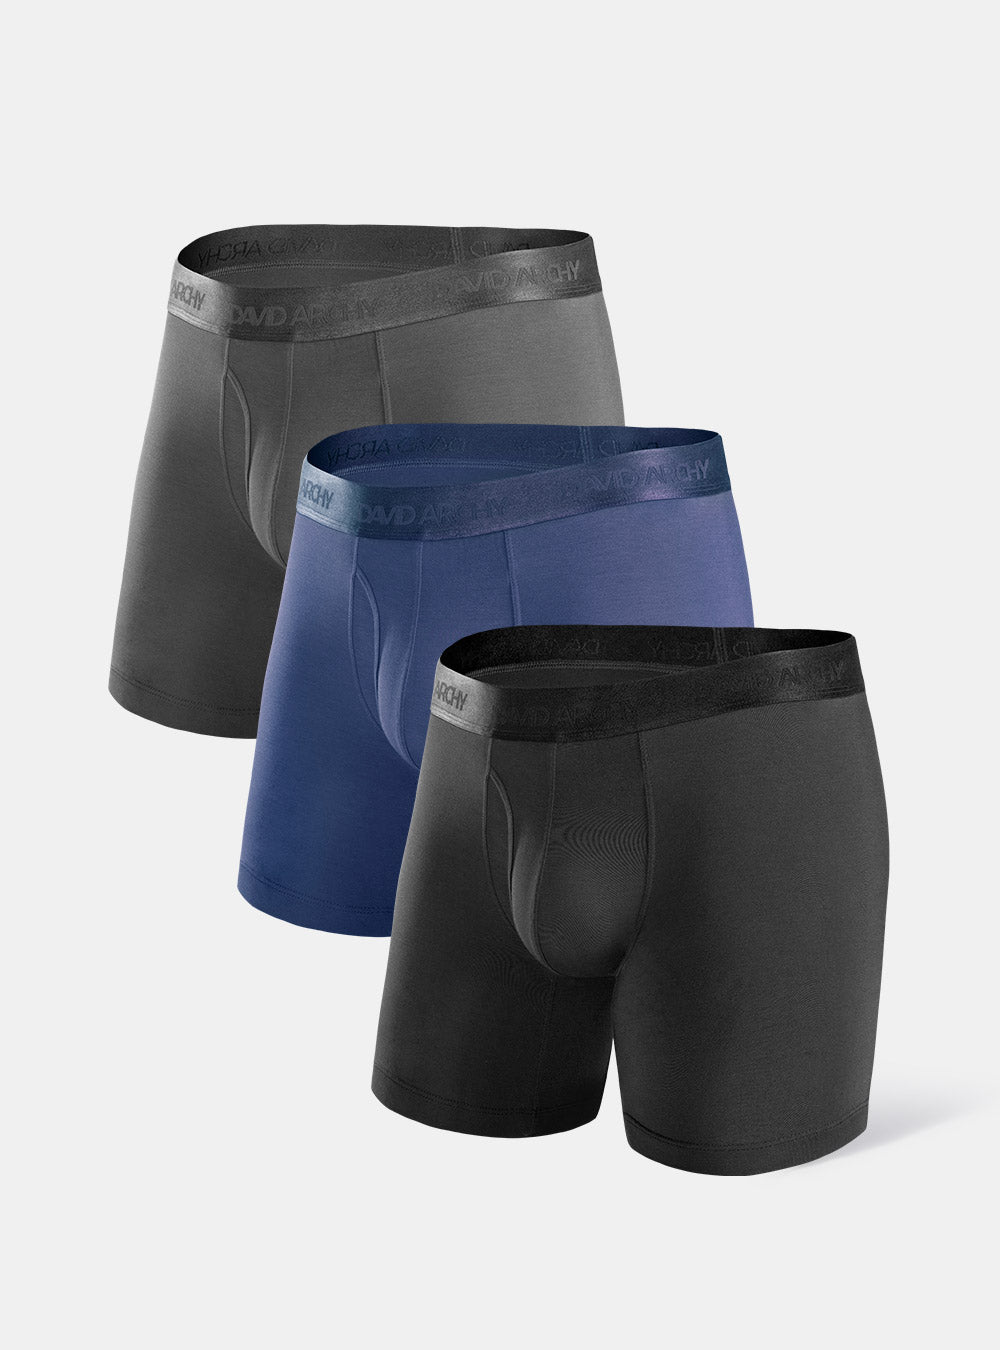 David Archy 3 Packs Boxer Briefs With Fly No-Ride Up Comfy Silky